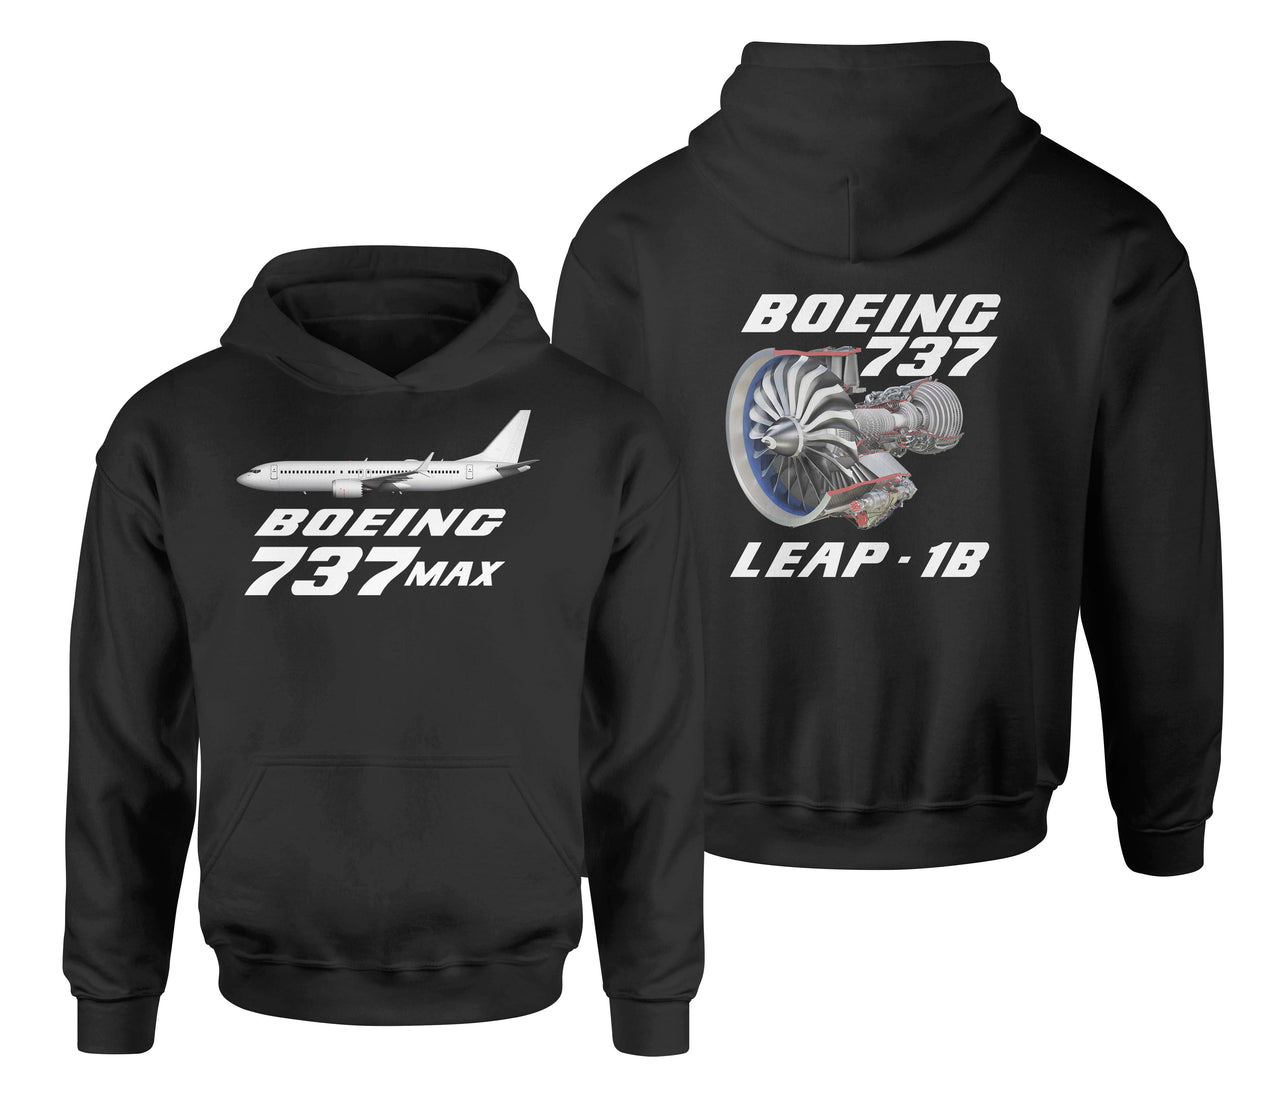 Boeing 737Max & Leap 1B Designed Double Side Hoodies